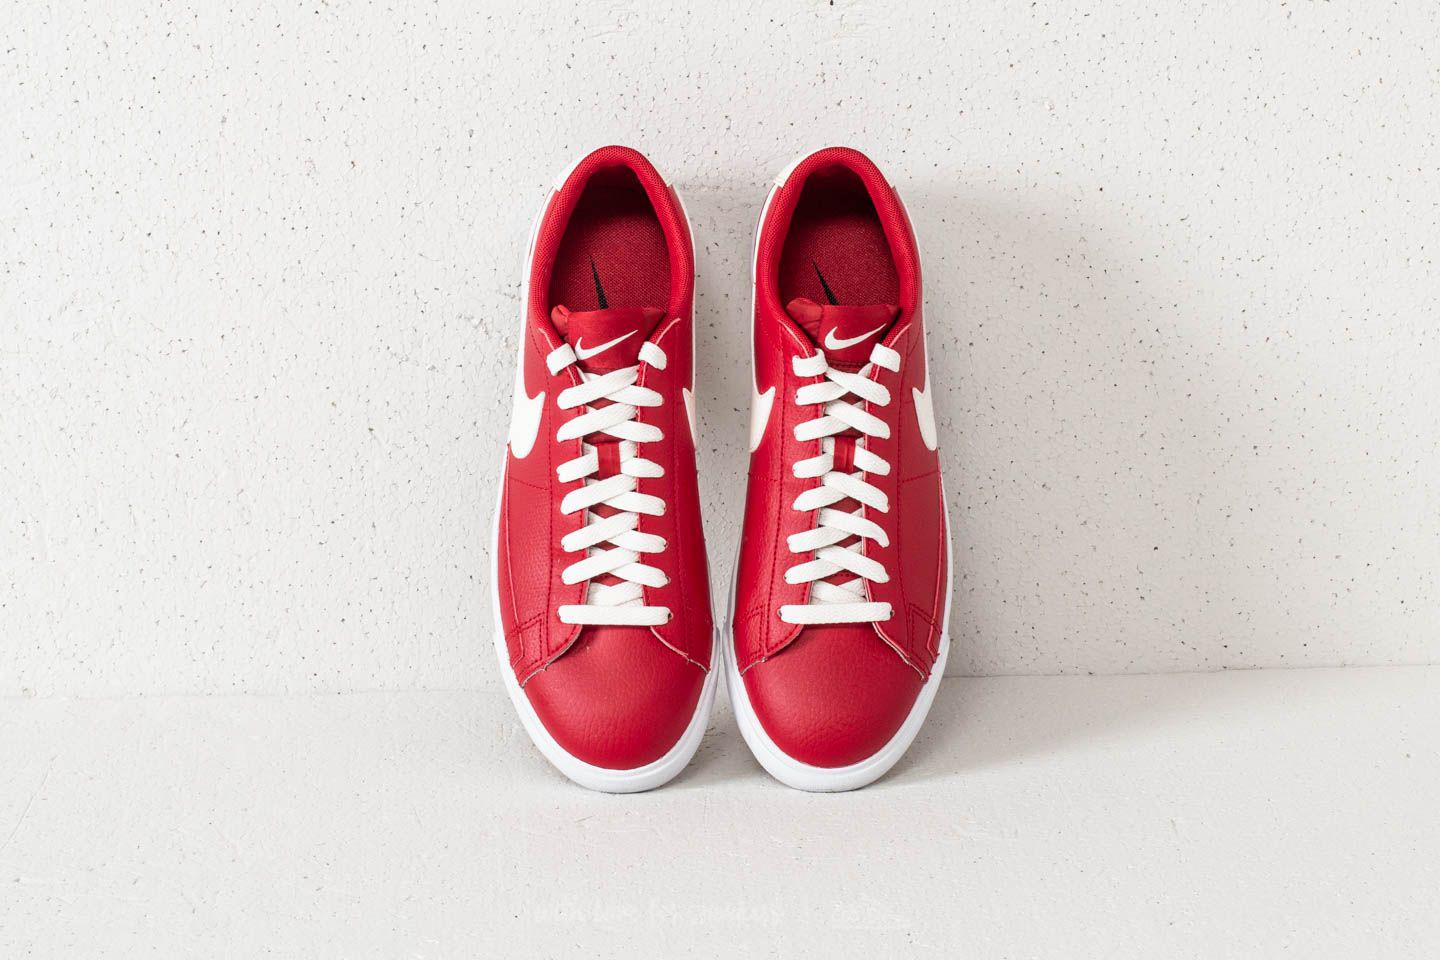 Nike Blazer Low Leather Gym Red/ Sail for Men - Lyst